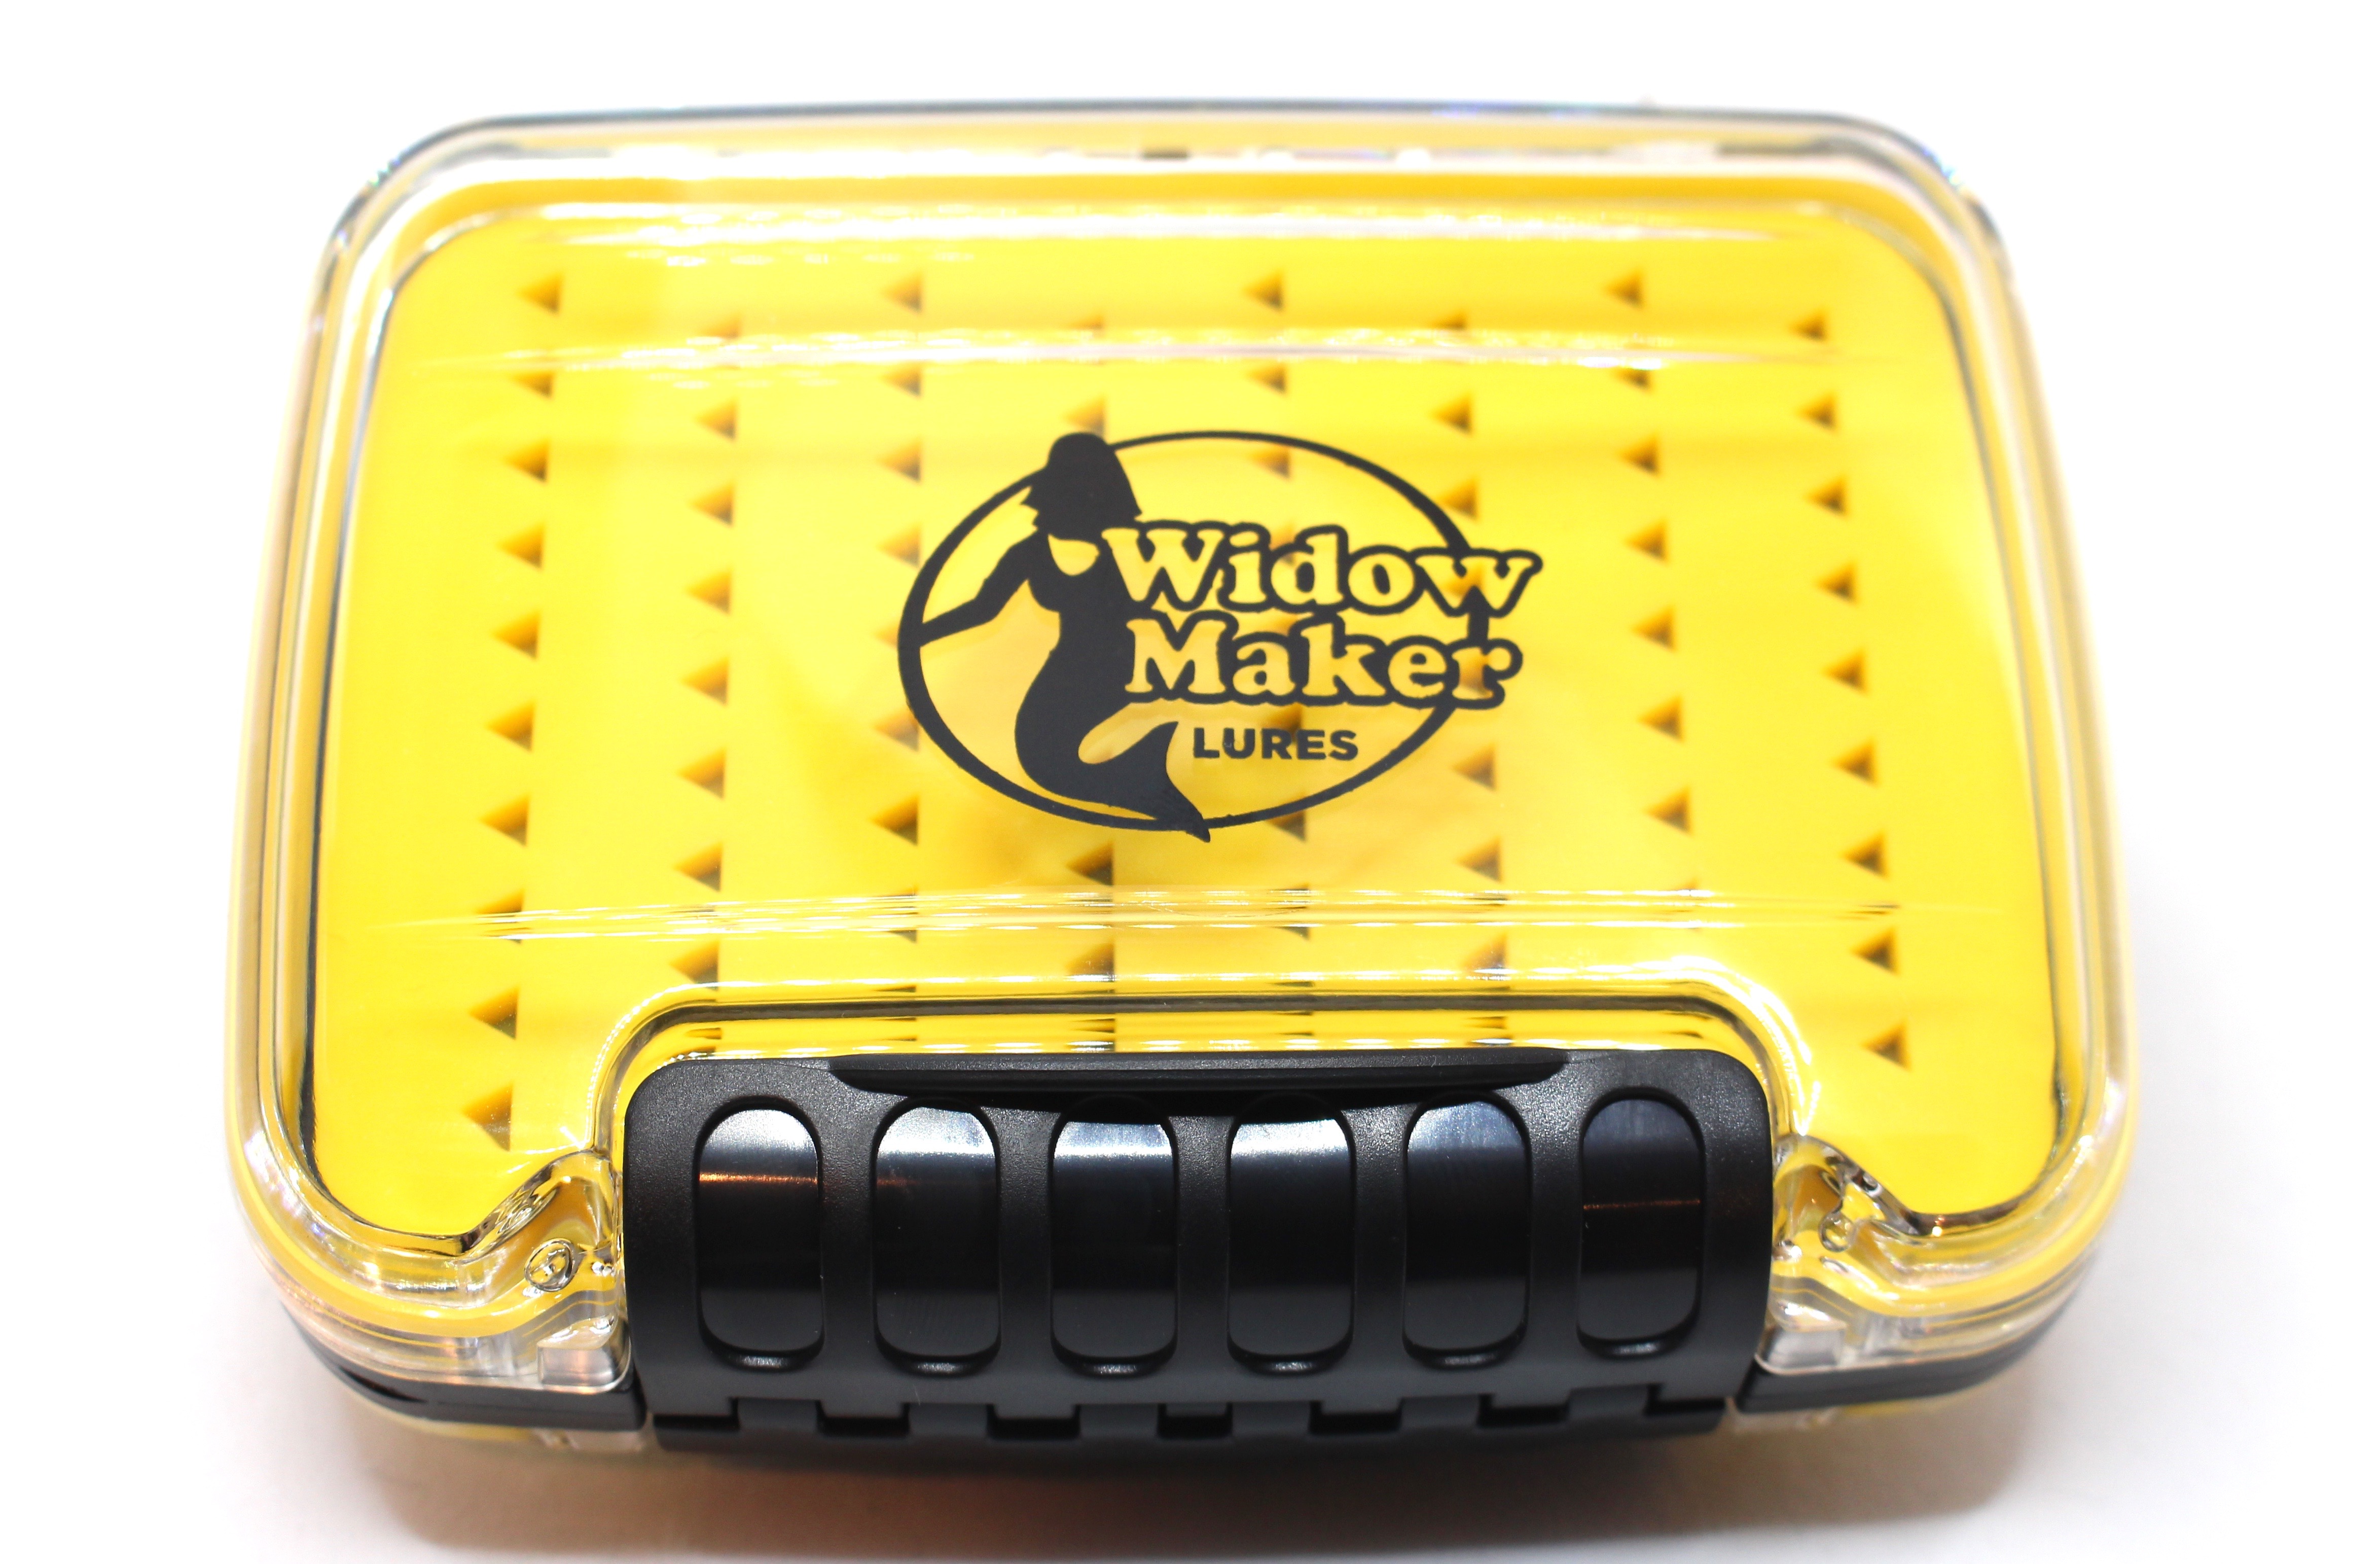 Deluxe Jig Box - Medium Silicone - Widow Maker Lures